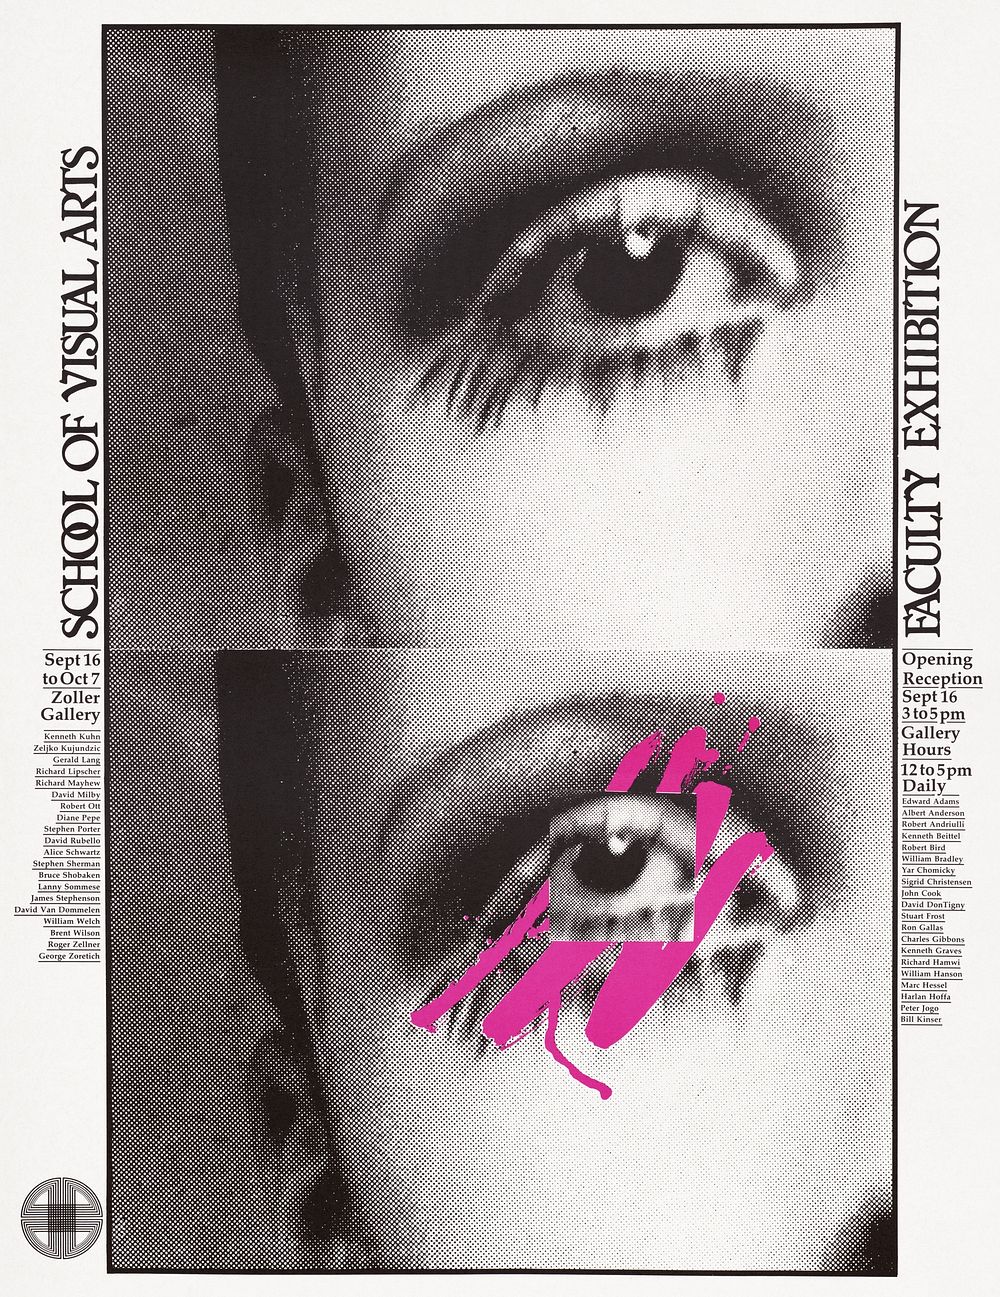 School of Visual Arts faculty exhibition (1979) poster by Lanny Sommese. Original public domain image from the Library of…